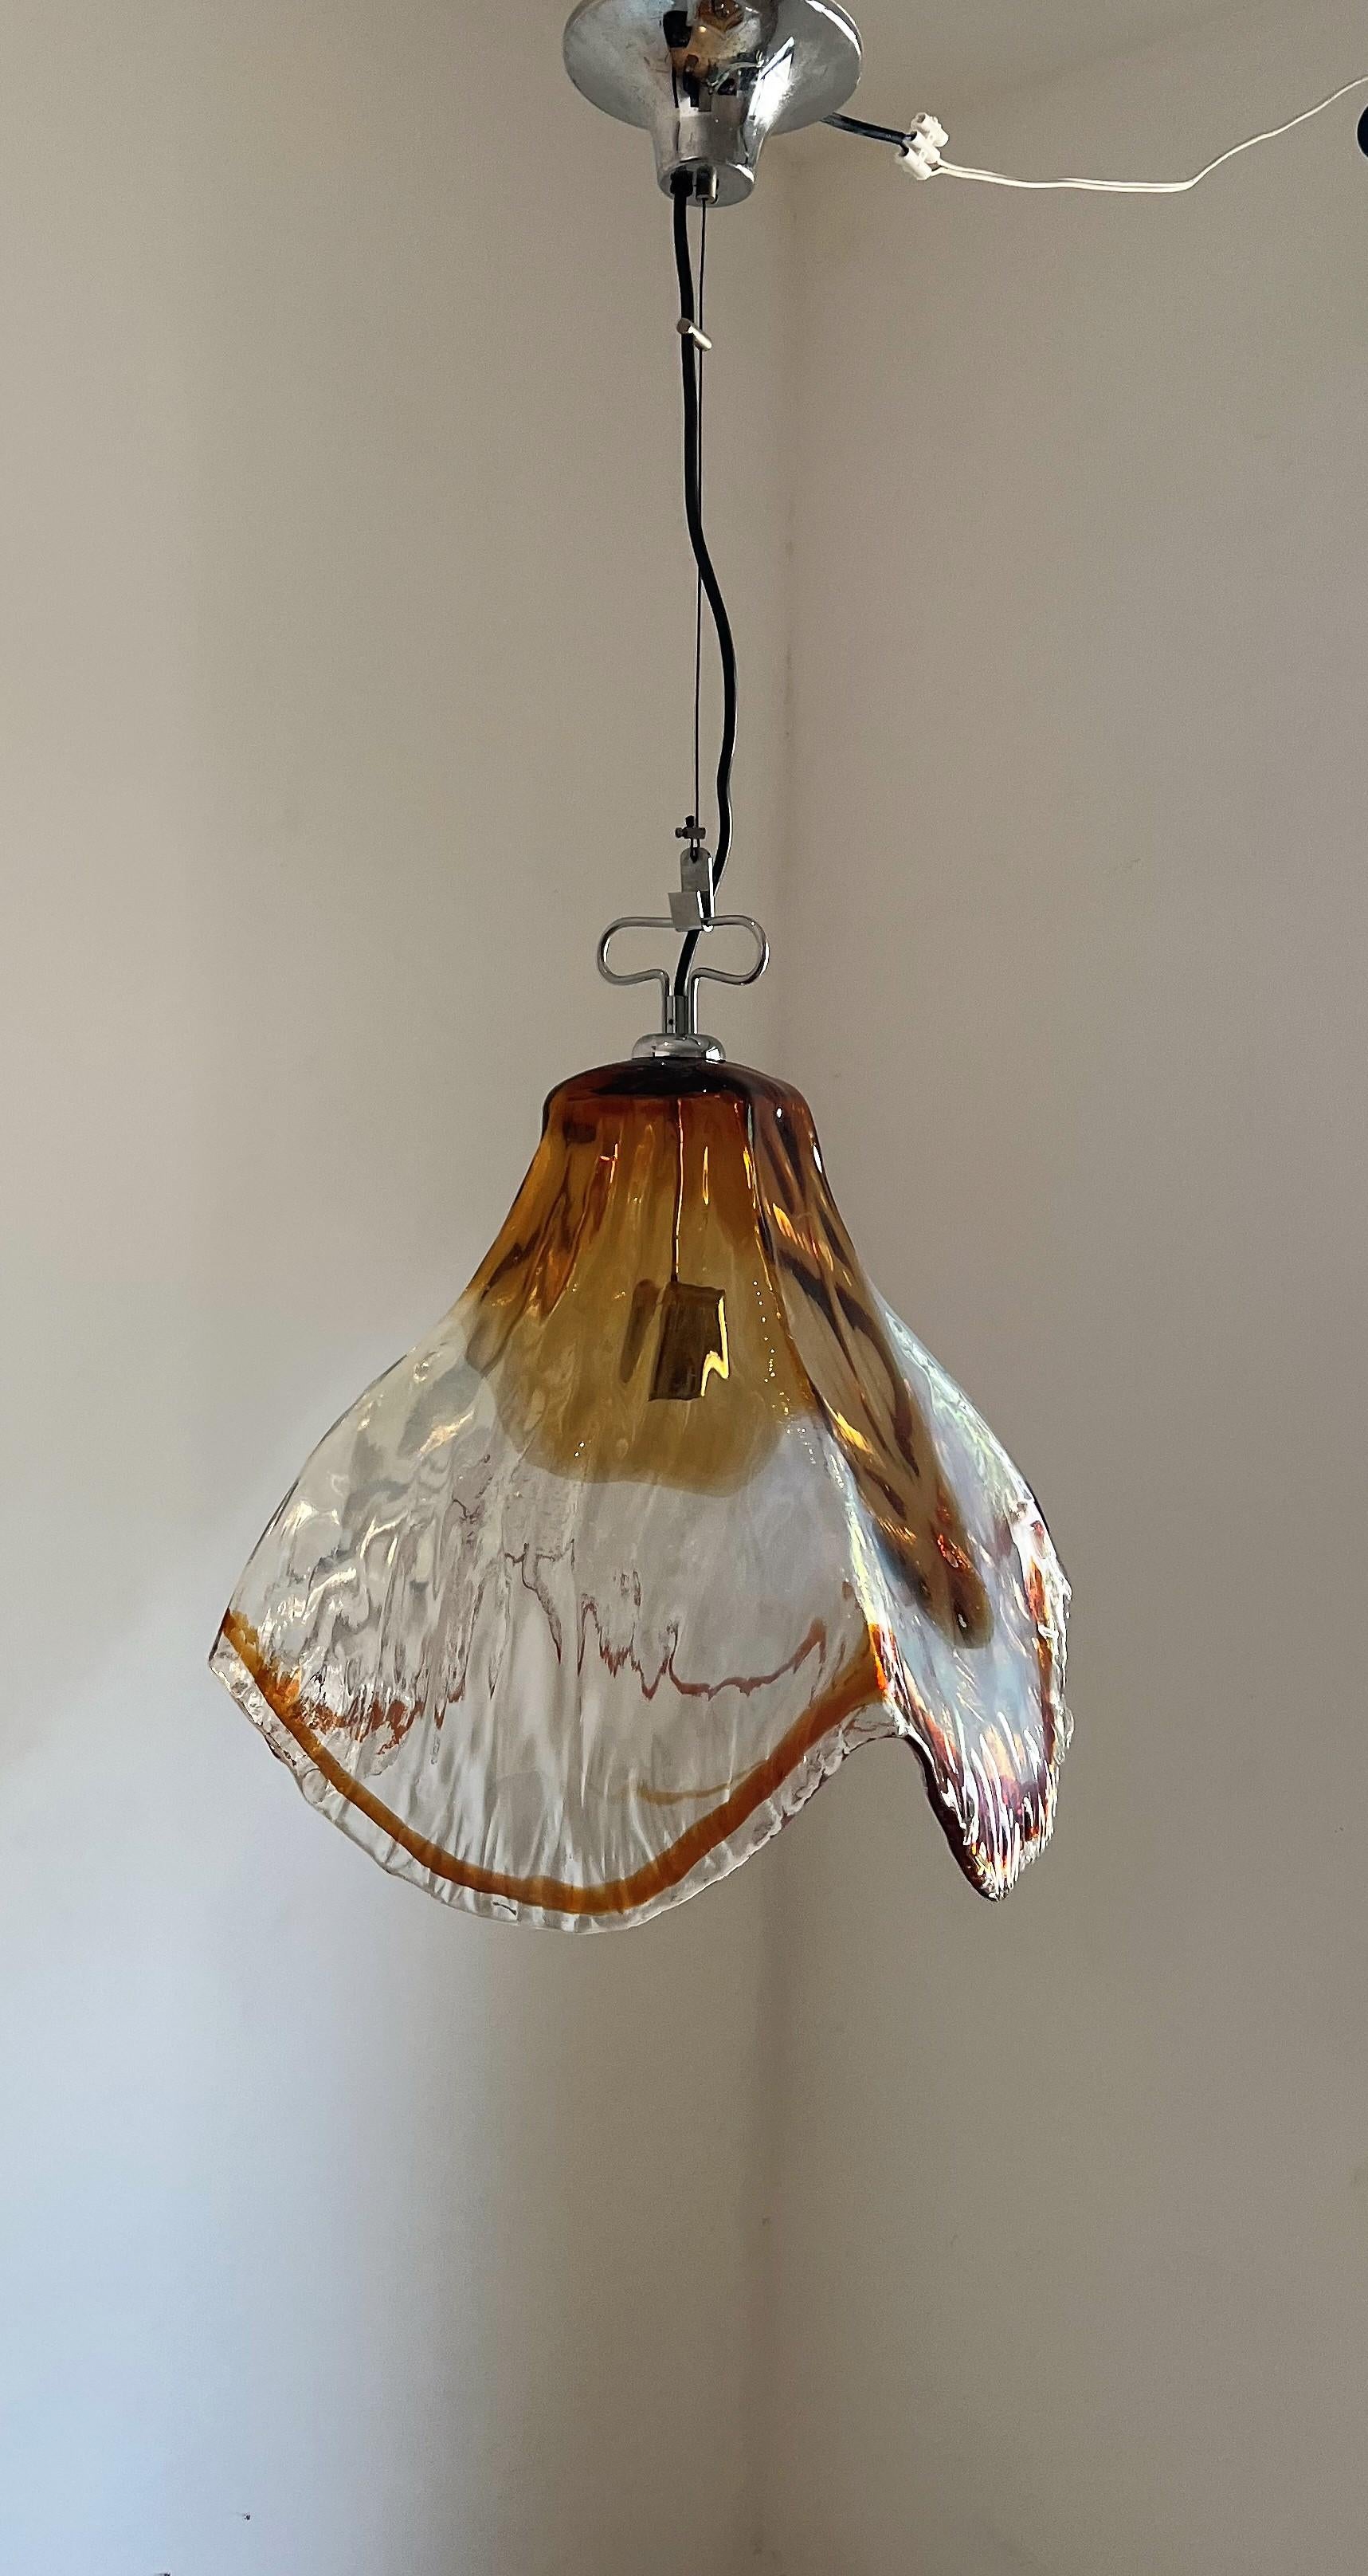 Blown Glass Mid-Century Modern Pendant Light by Mazzega in Murano Opalescent Glass ca 1968 For Sale